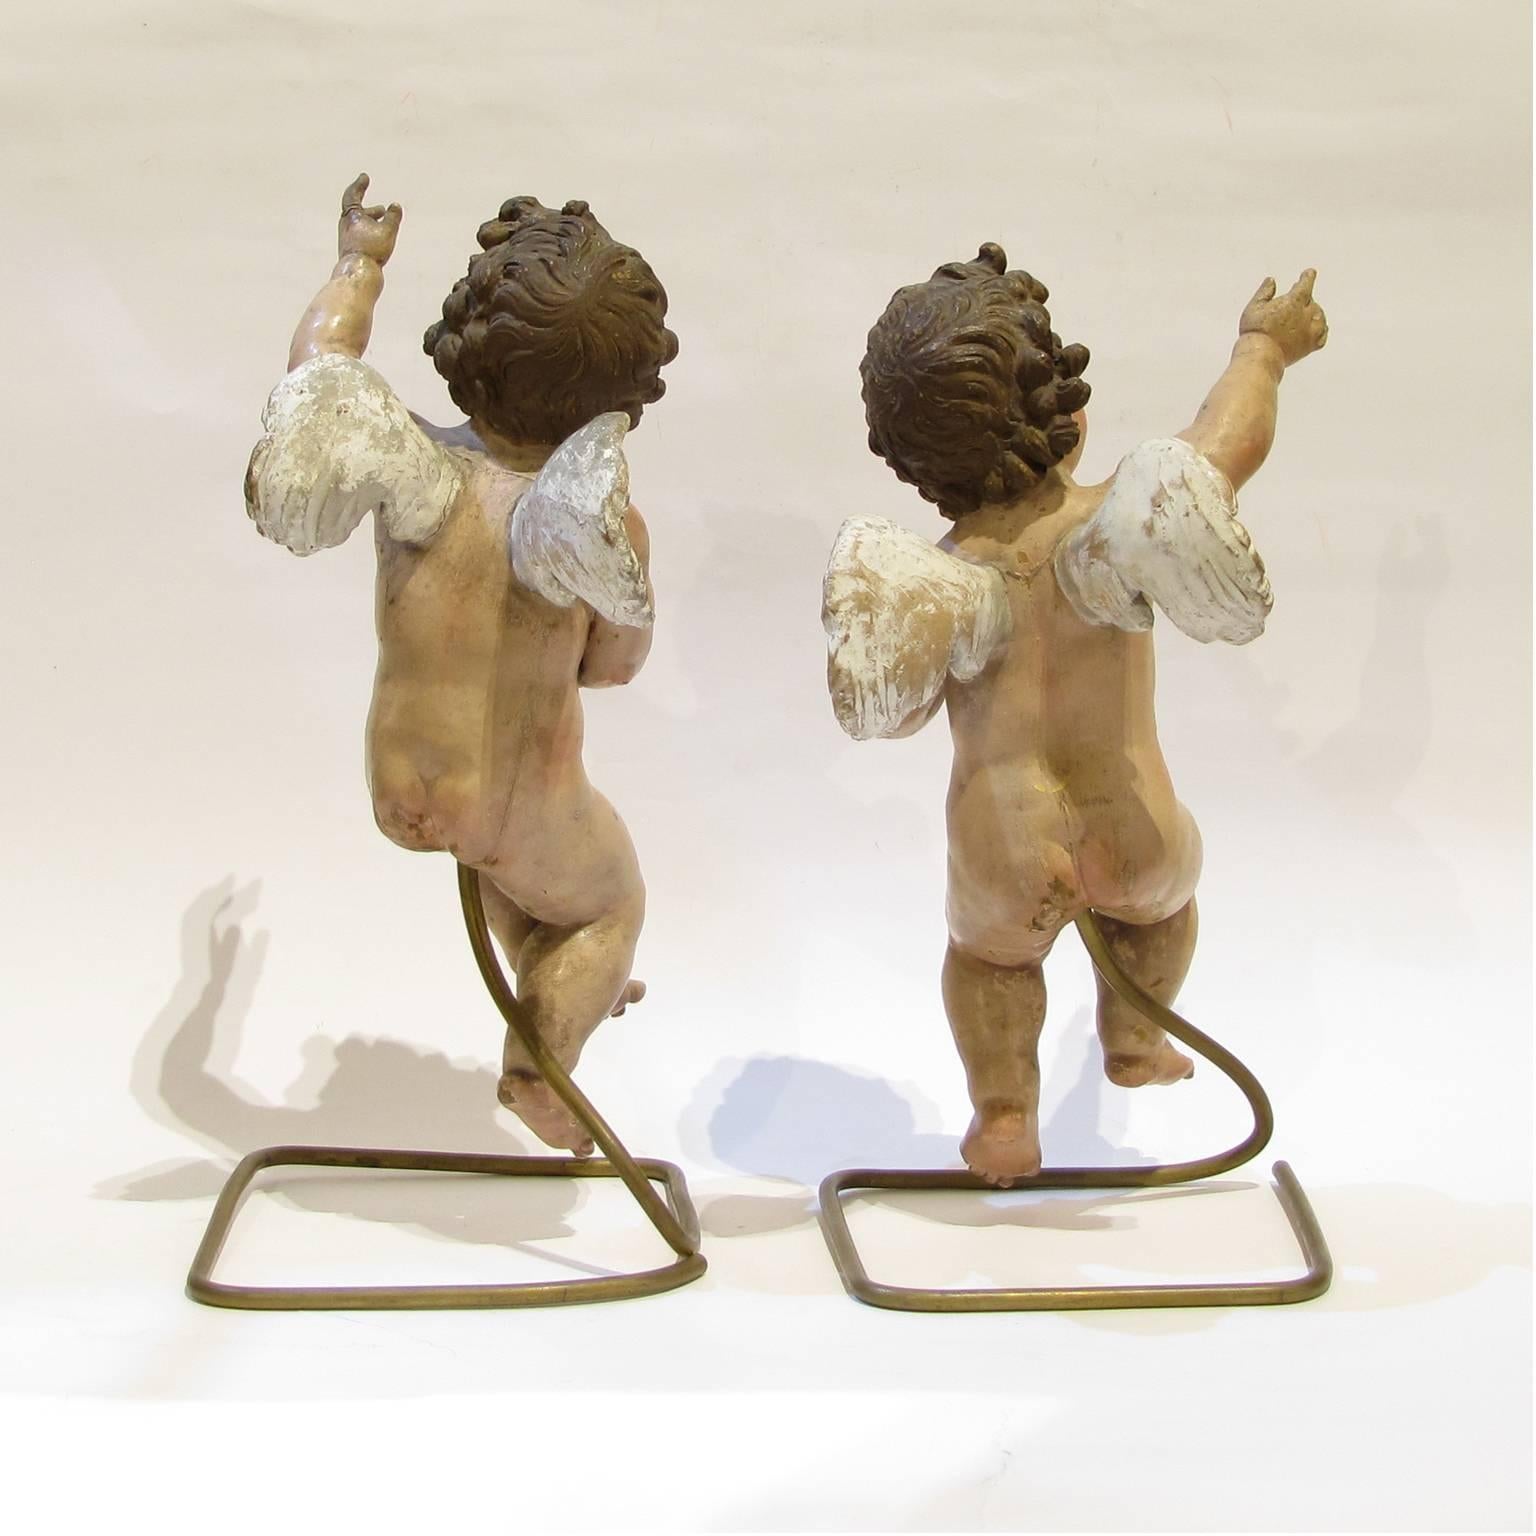 Polychromed Two Early 18th Century Neapolitan Polychrome Terracotta Angels